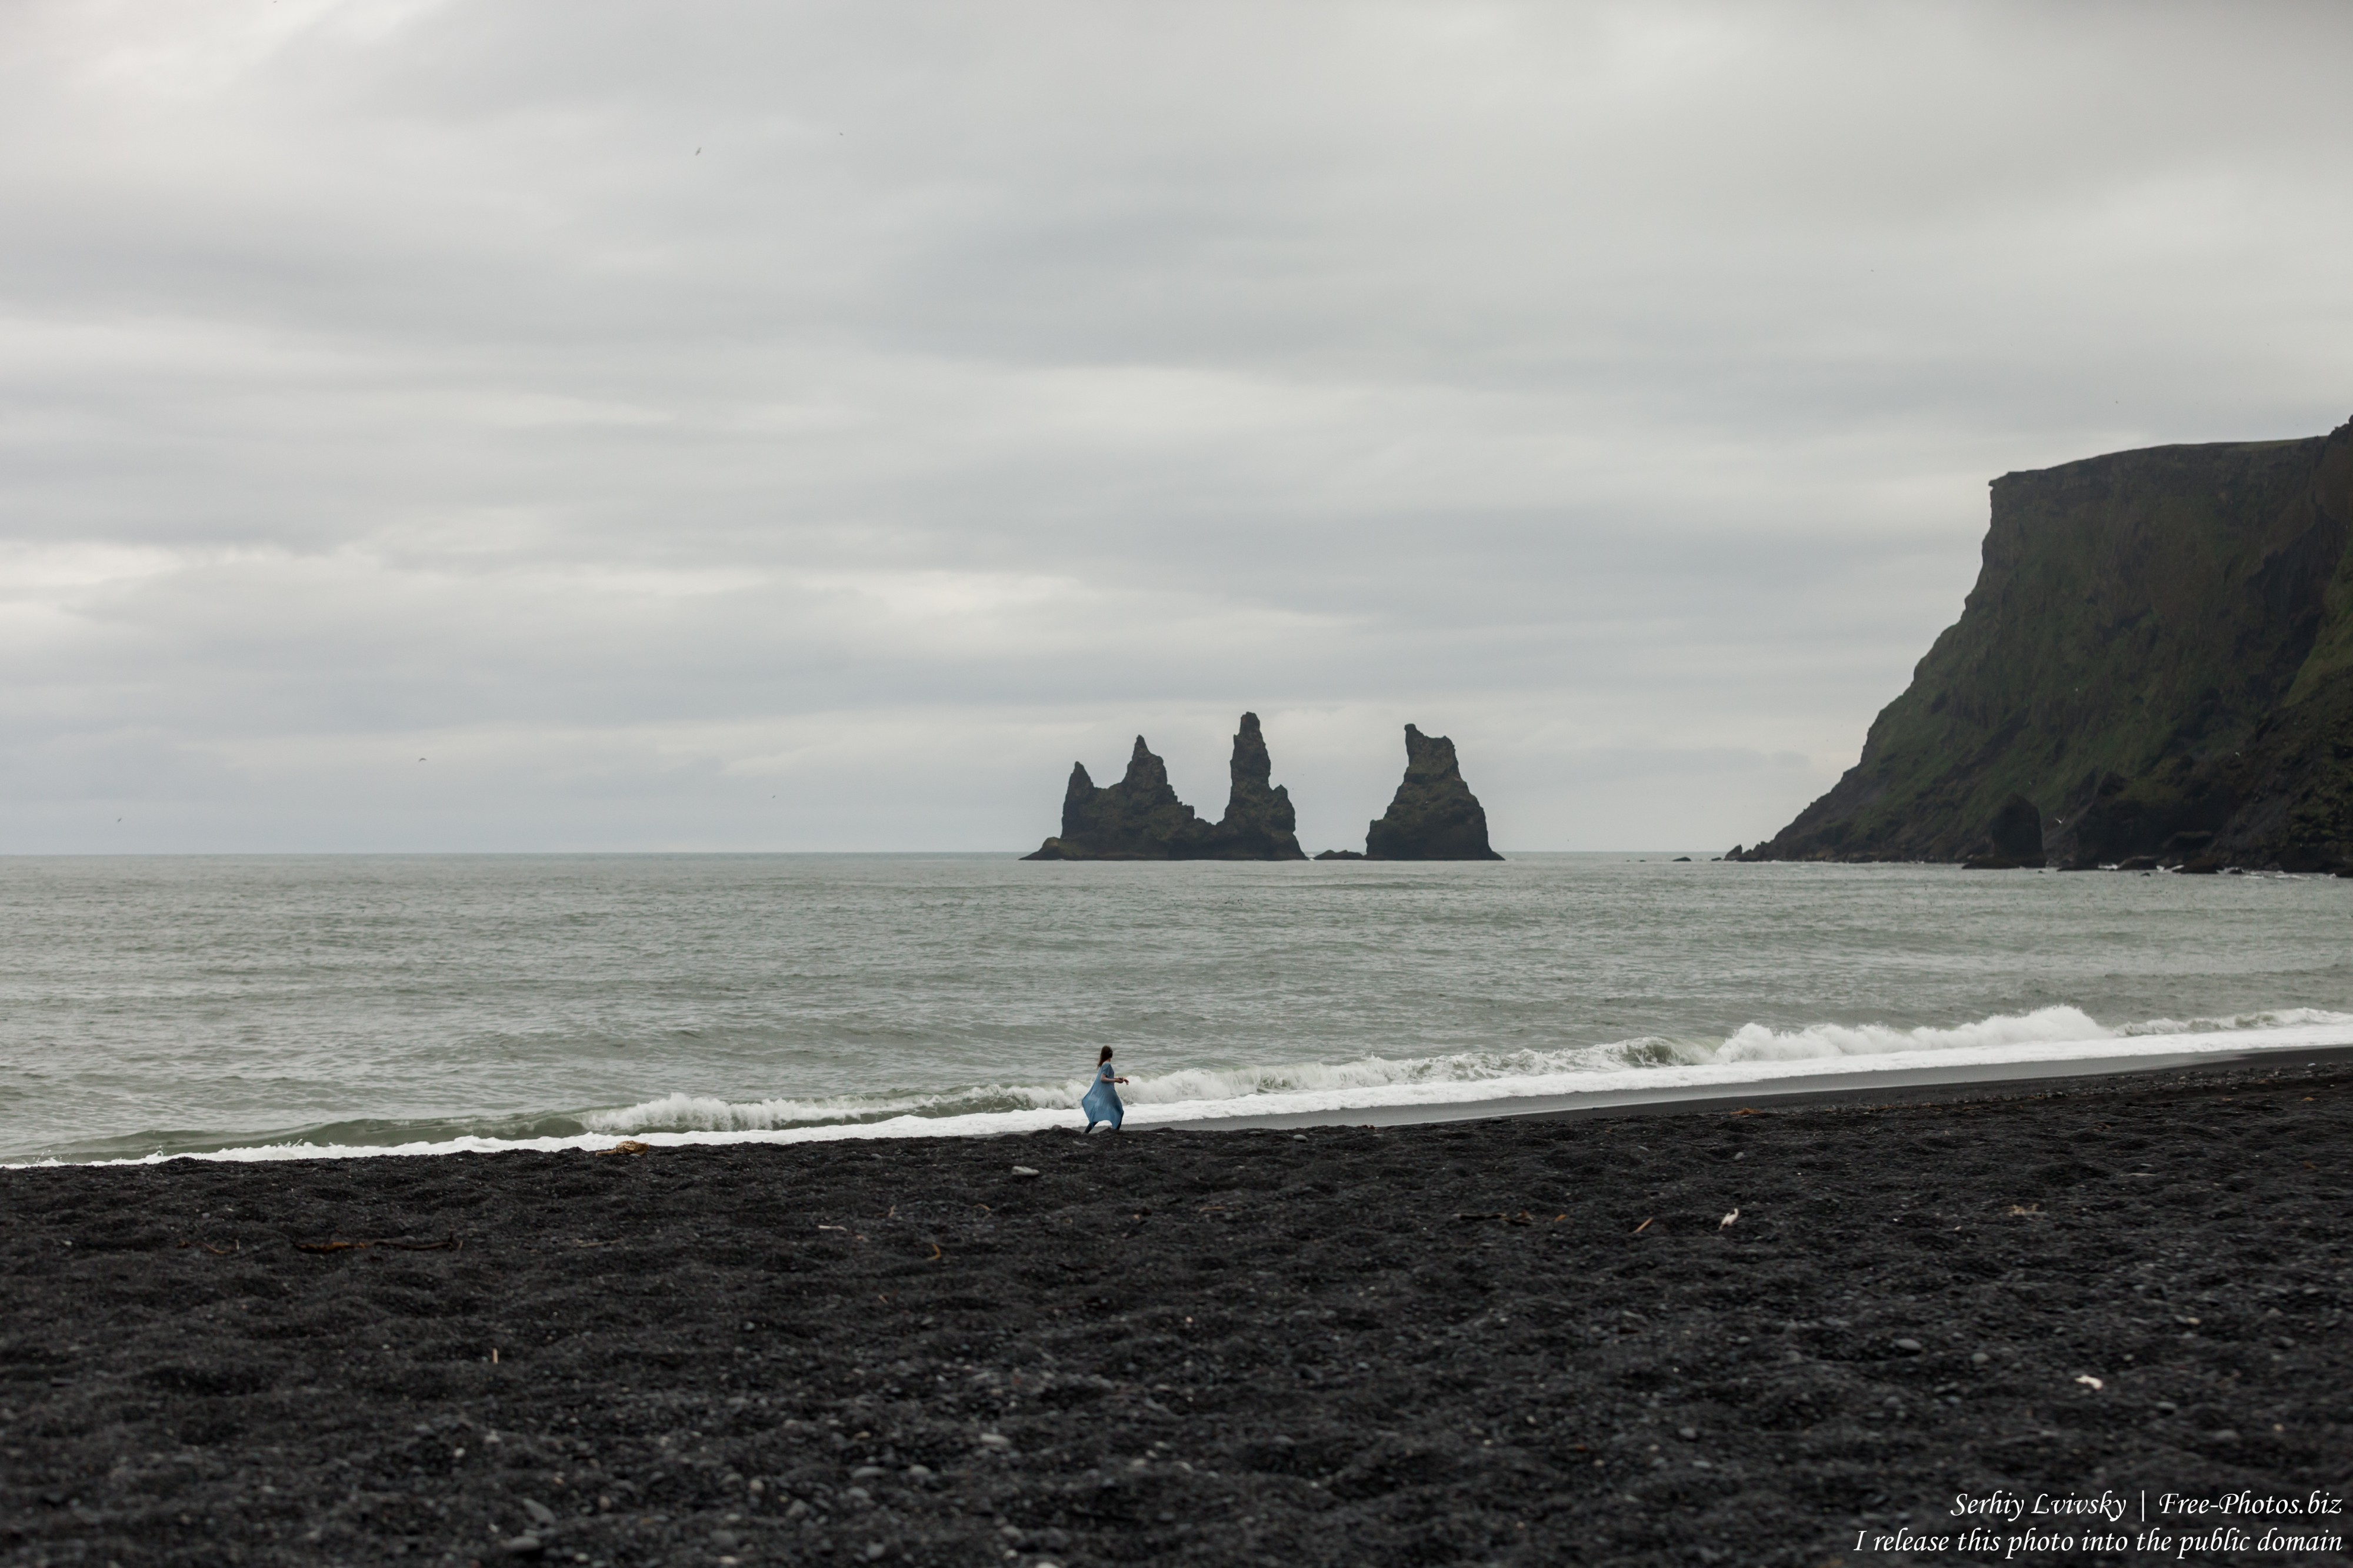 Vik, Iceland, photographed in May 2019 by Serhiy Lvivsky, picture 7